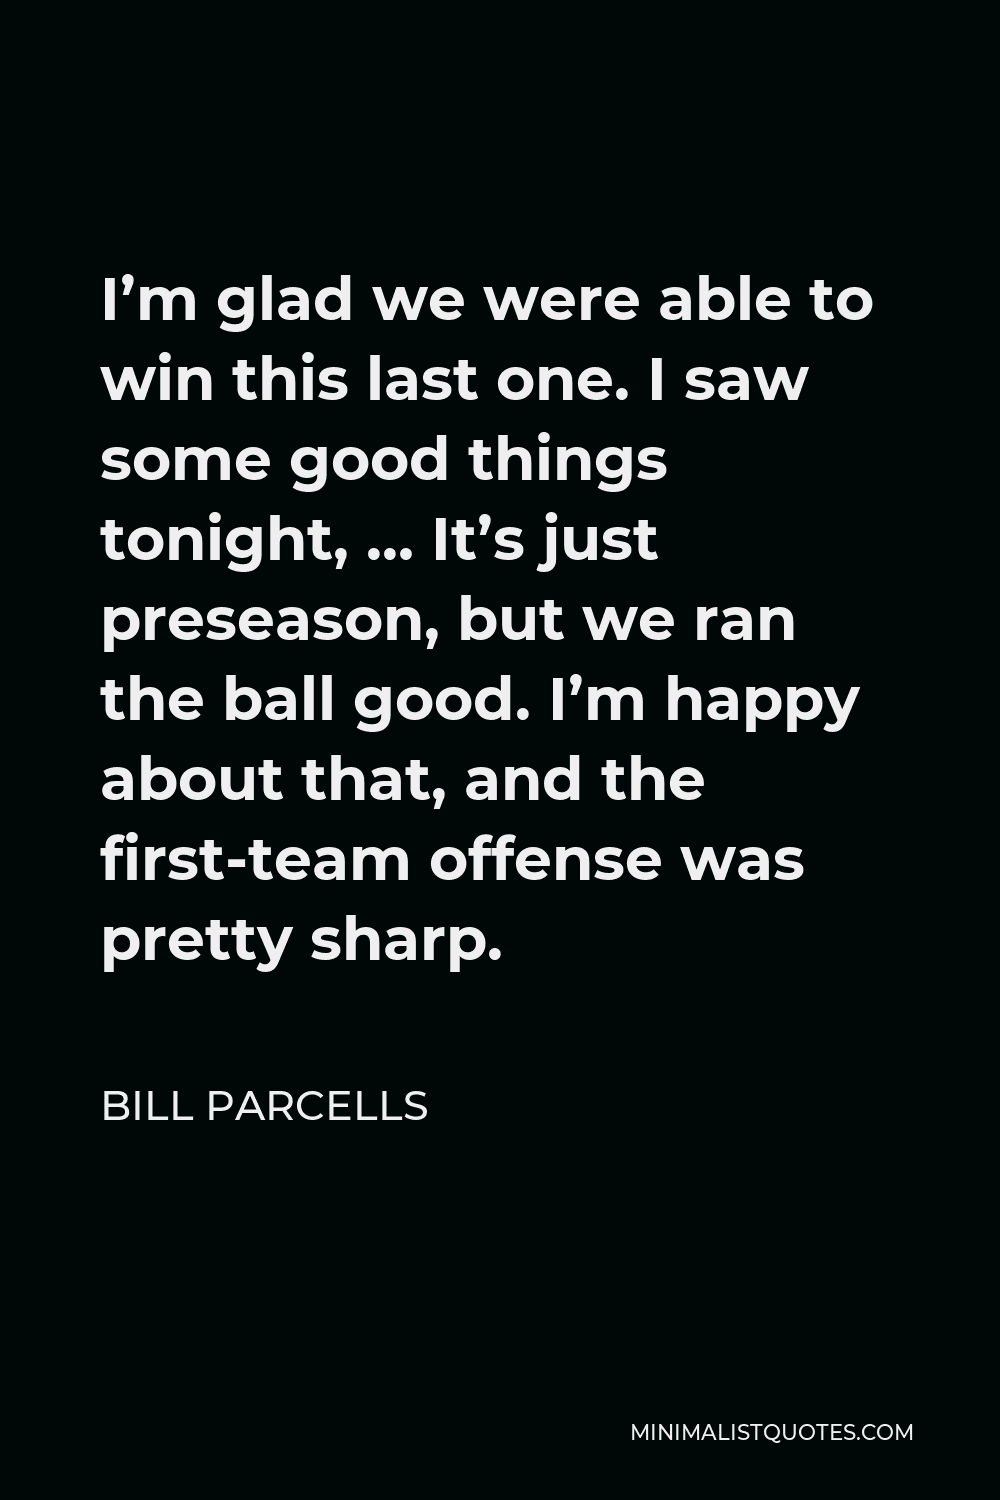 Bill Parcells Quote - I’m glad we were able to win this last one. I saw some good things tonight, … It’s just preseason, but we ran the ball good. I’m happy about that, and the first-team offense was pretty sharp.